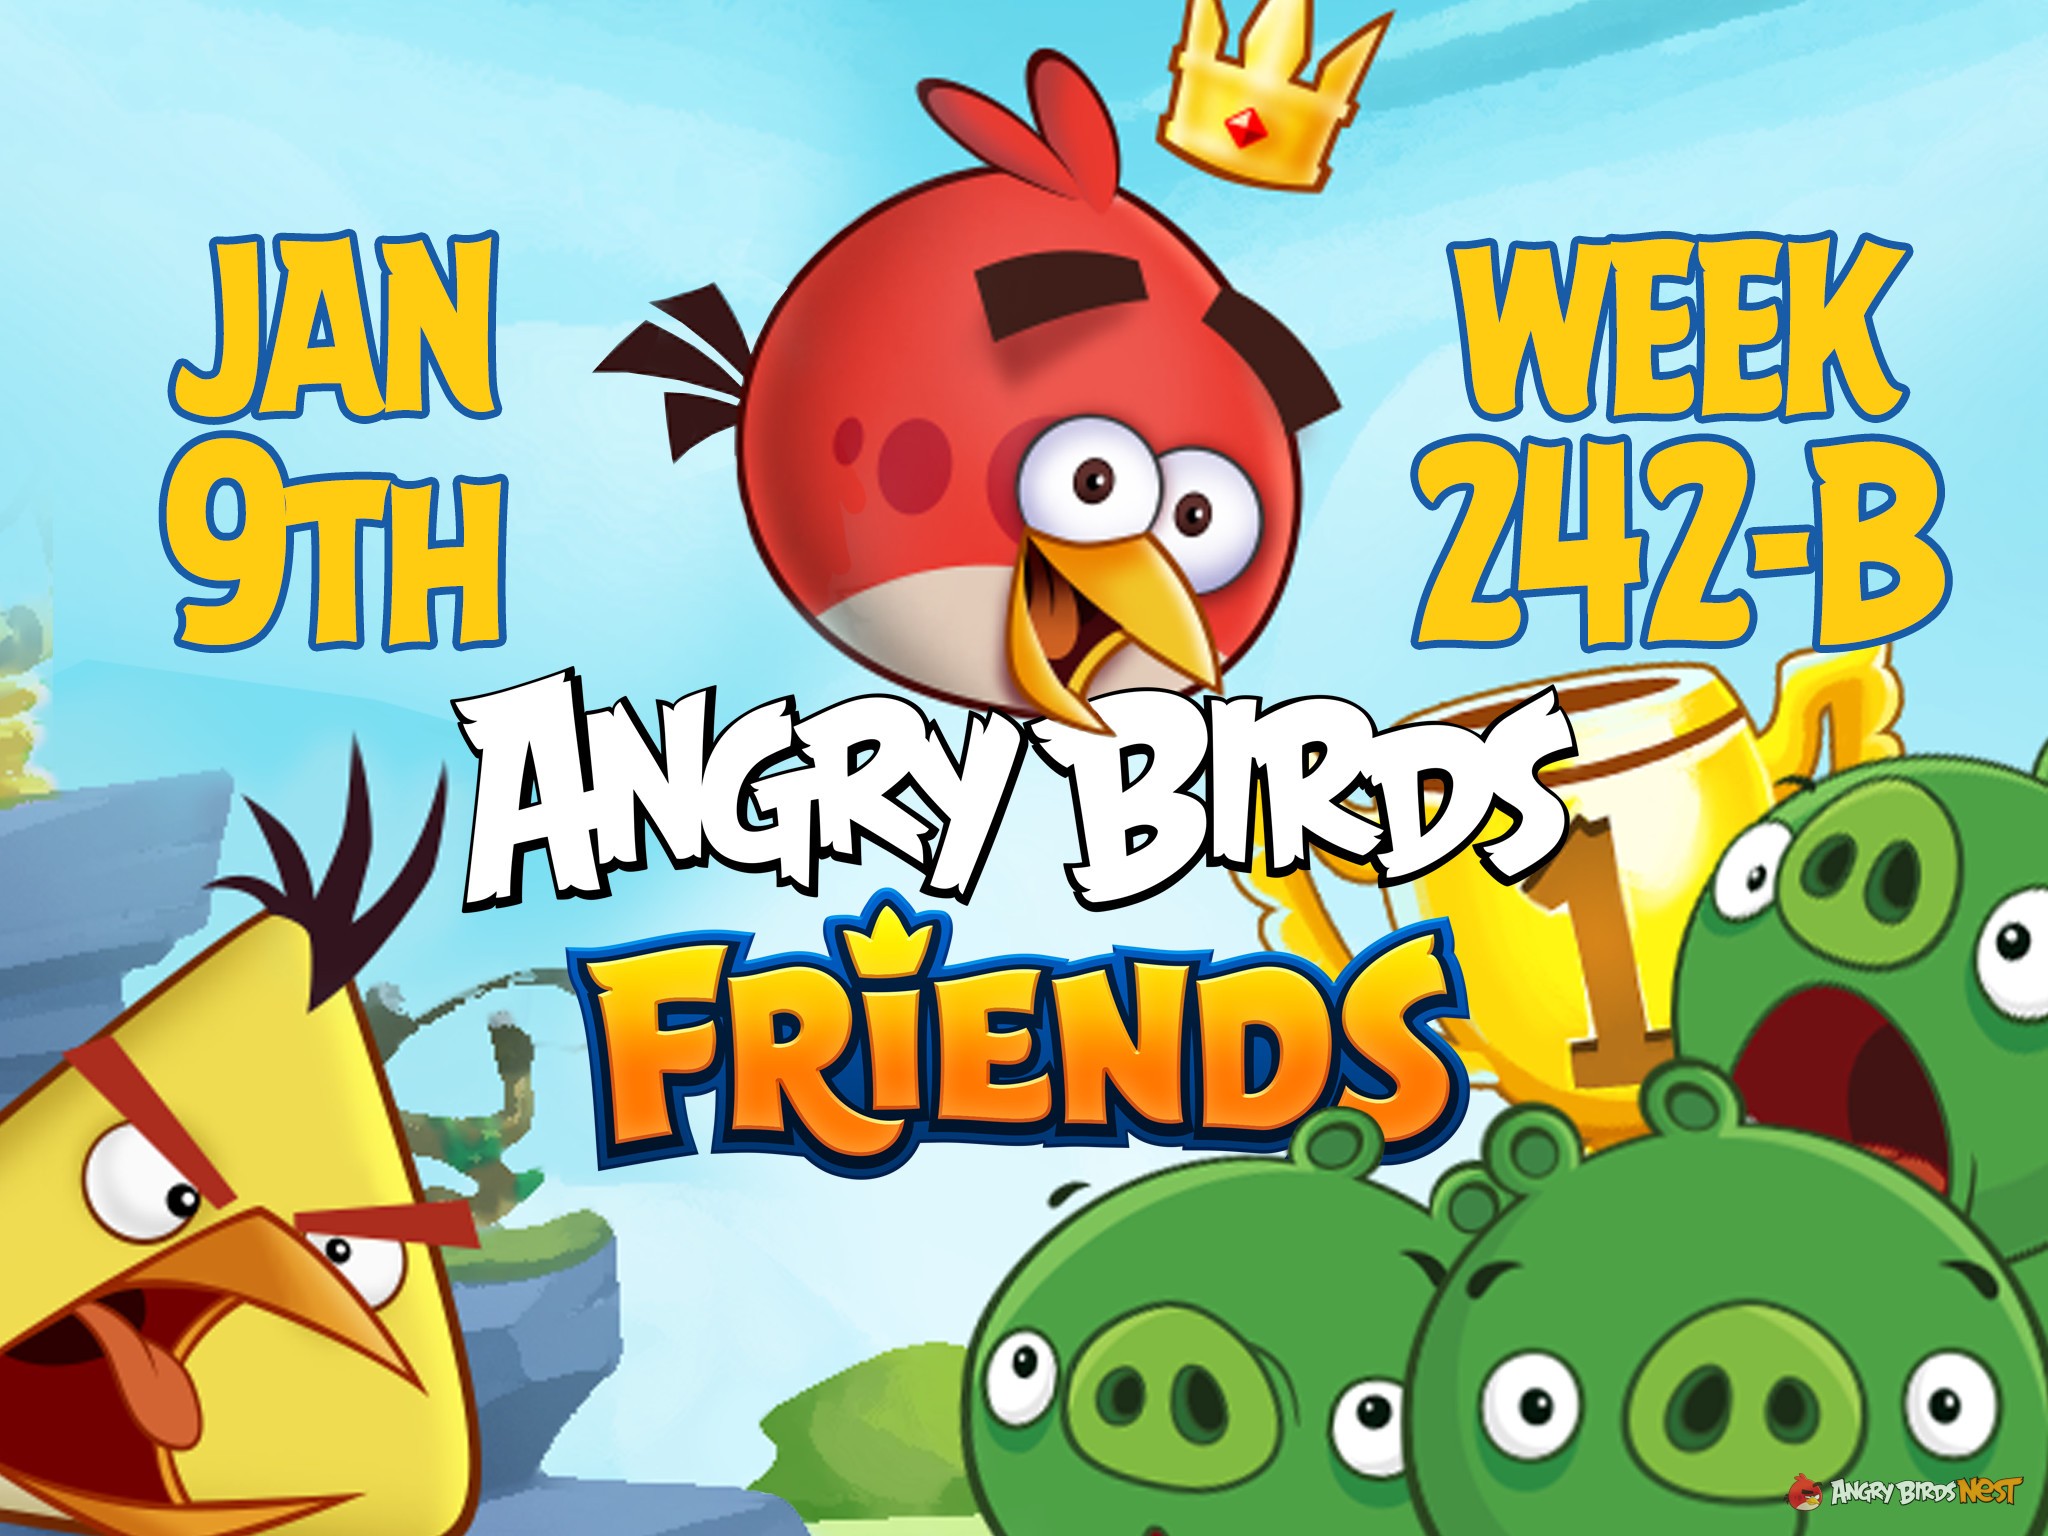 Angry Birds Friends Tournament Week 242-B Feature Image